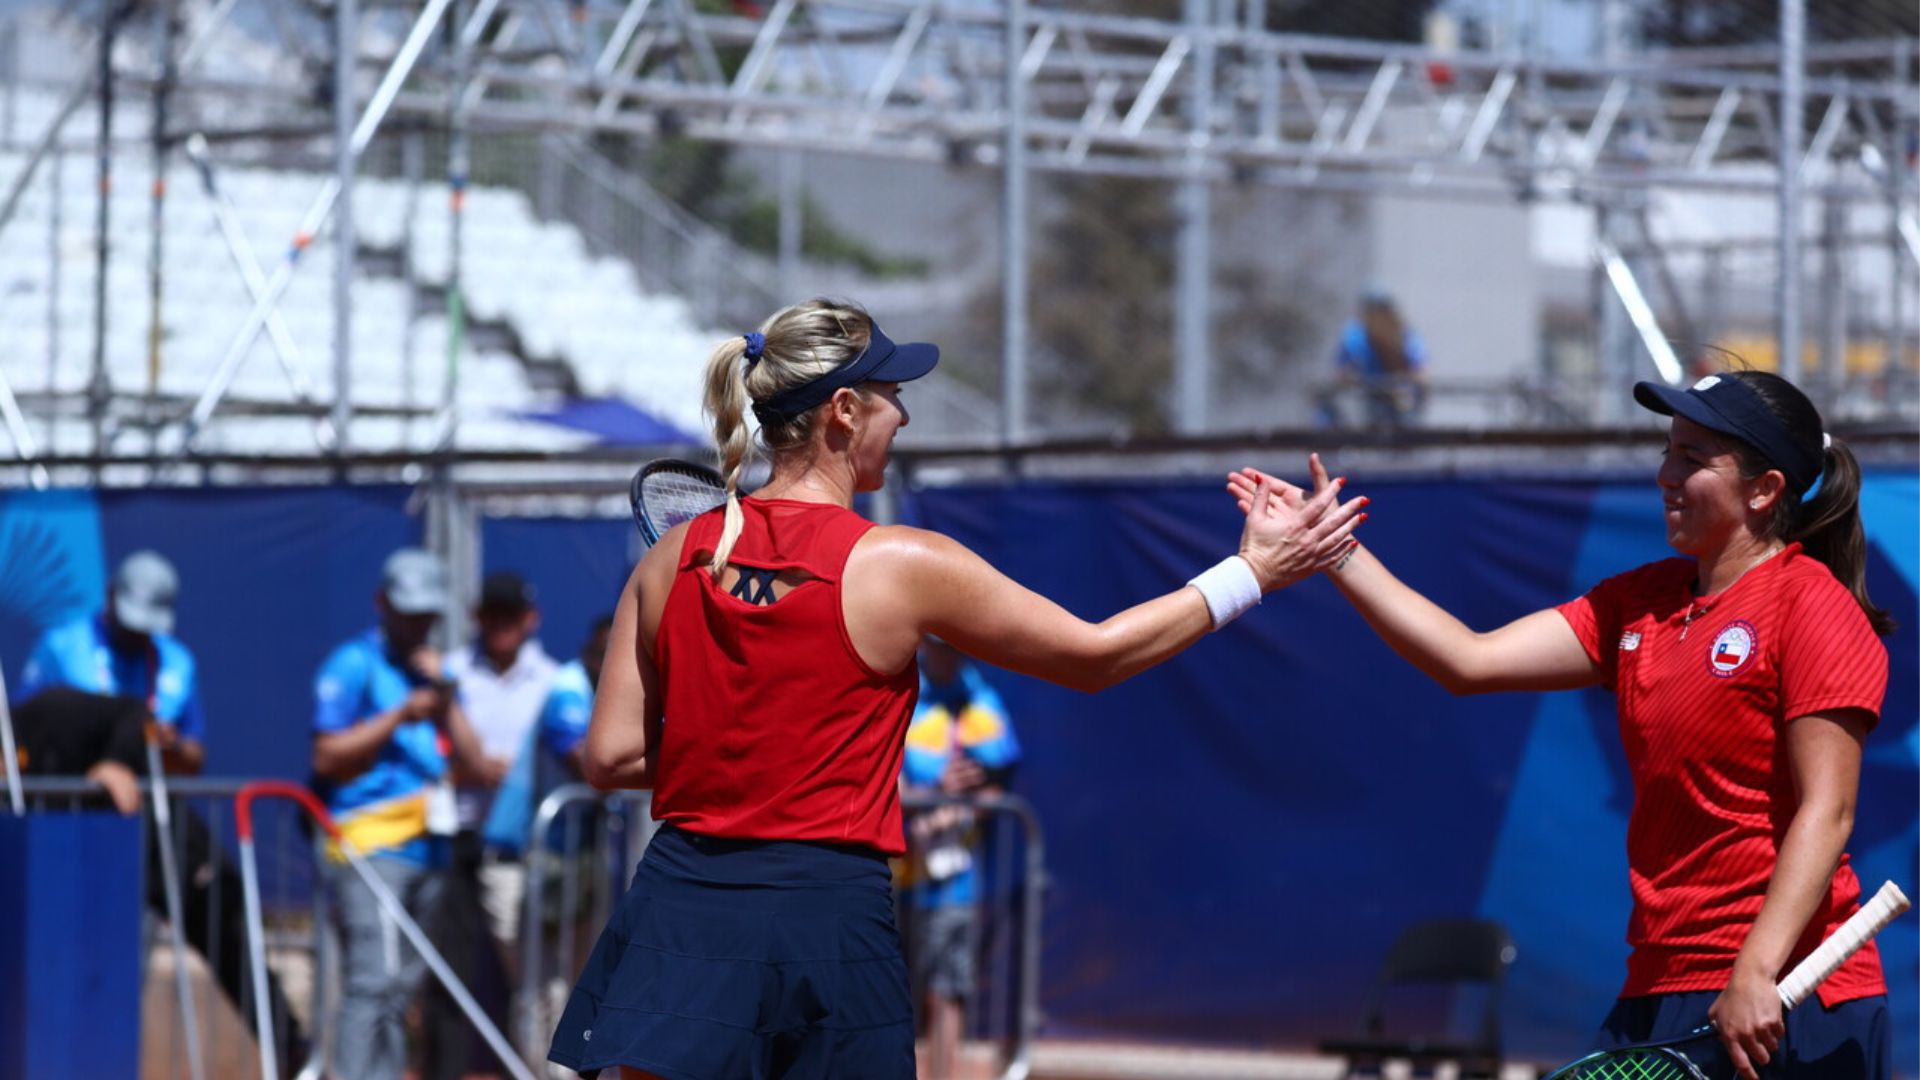 Chile advances to semi-finals of female doubles in Pan American tennis